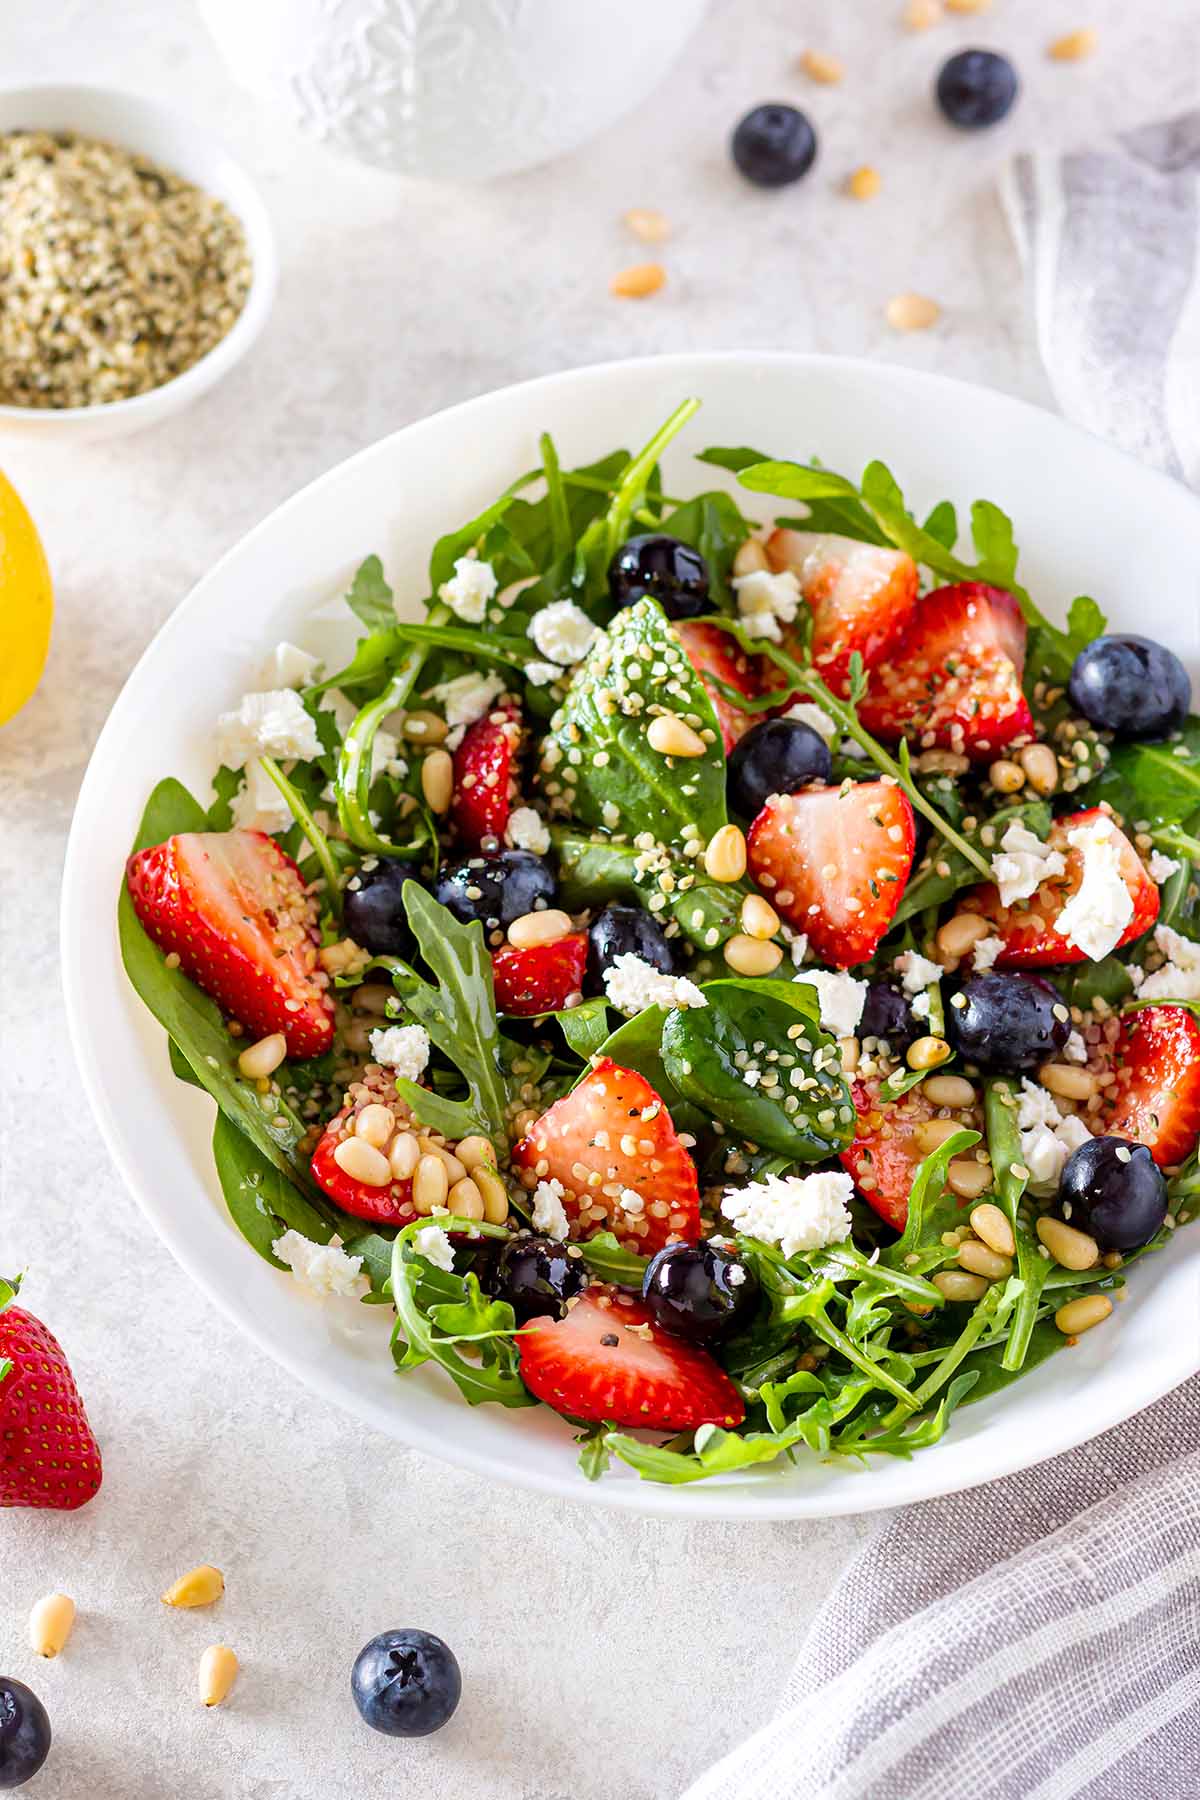 https://thewillowskitchen.com/wp-content/uploads/2022/05/green-salad-with-strawberries-01.jpg